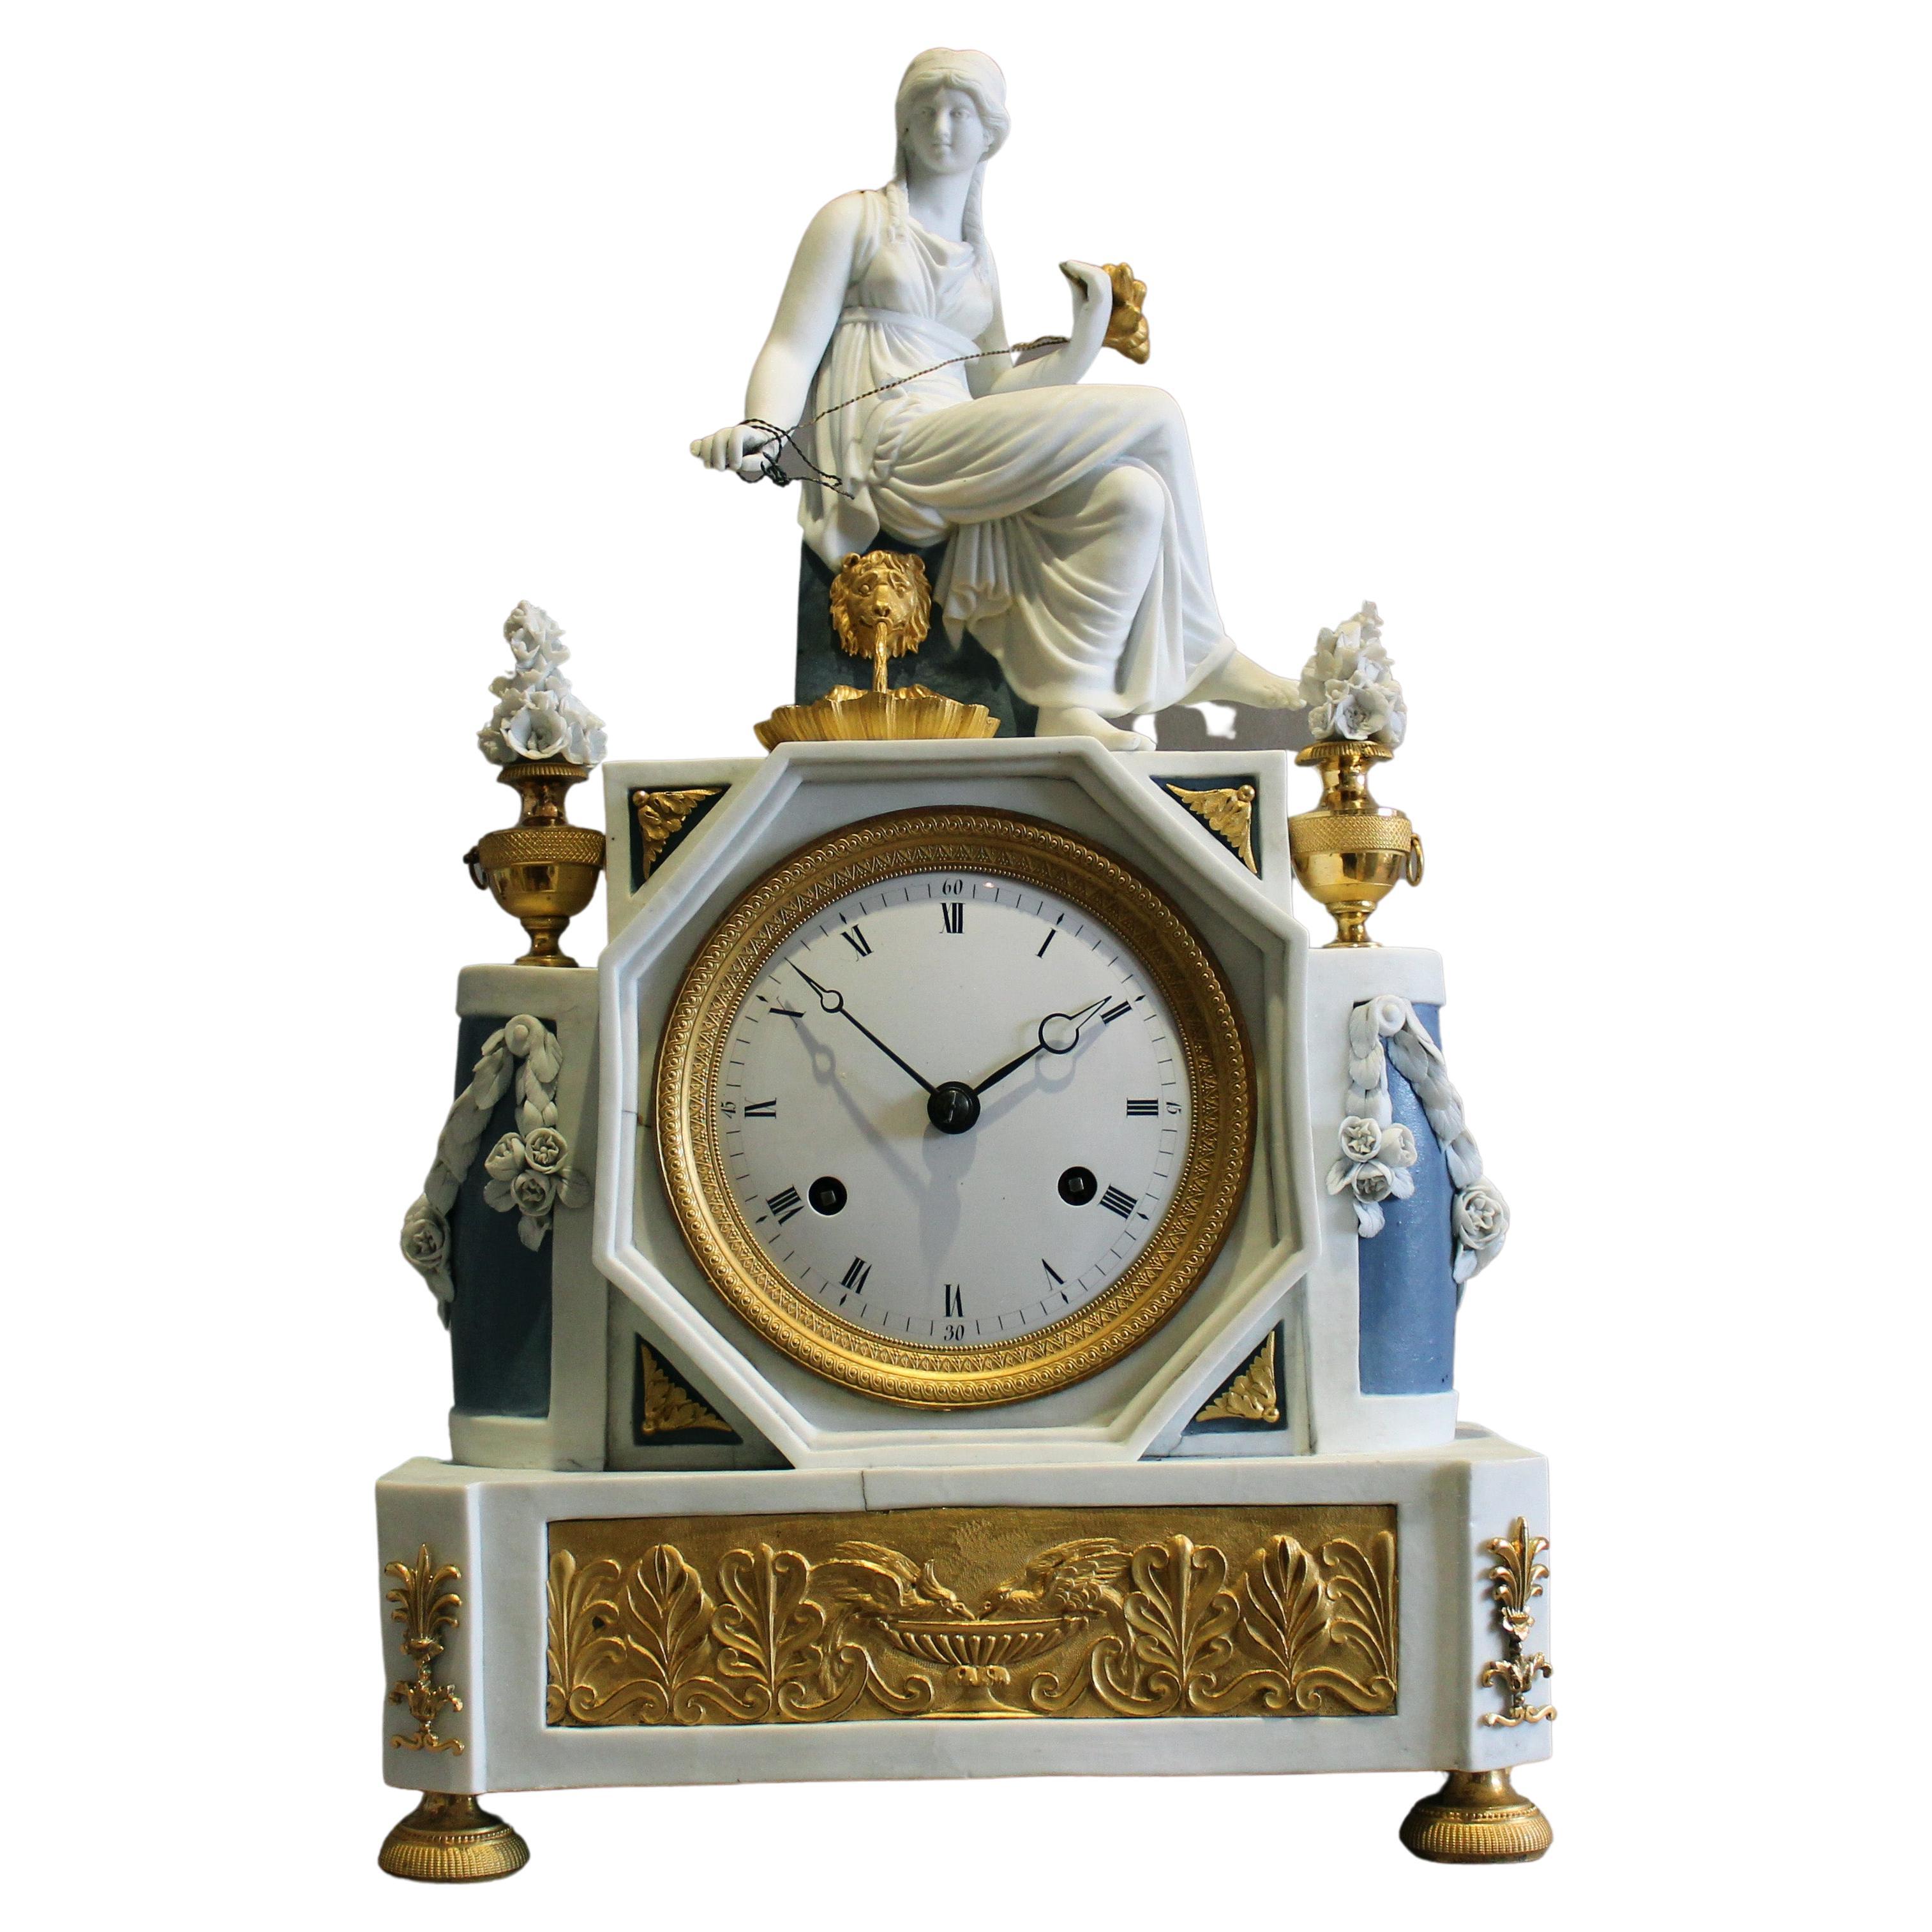 French Directoire Period Bisque and Ormolu Mantel Clock Depicting Ariadne For Sale